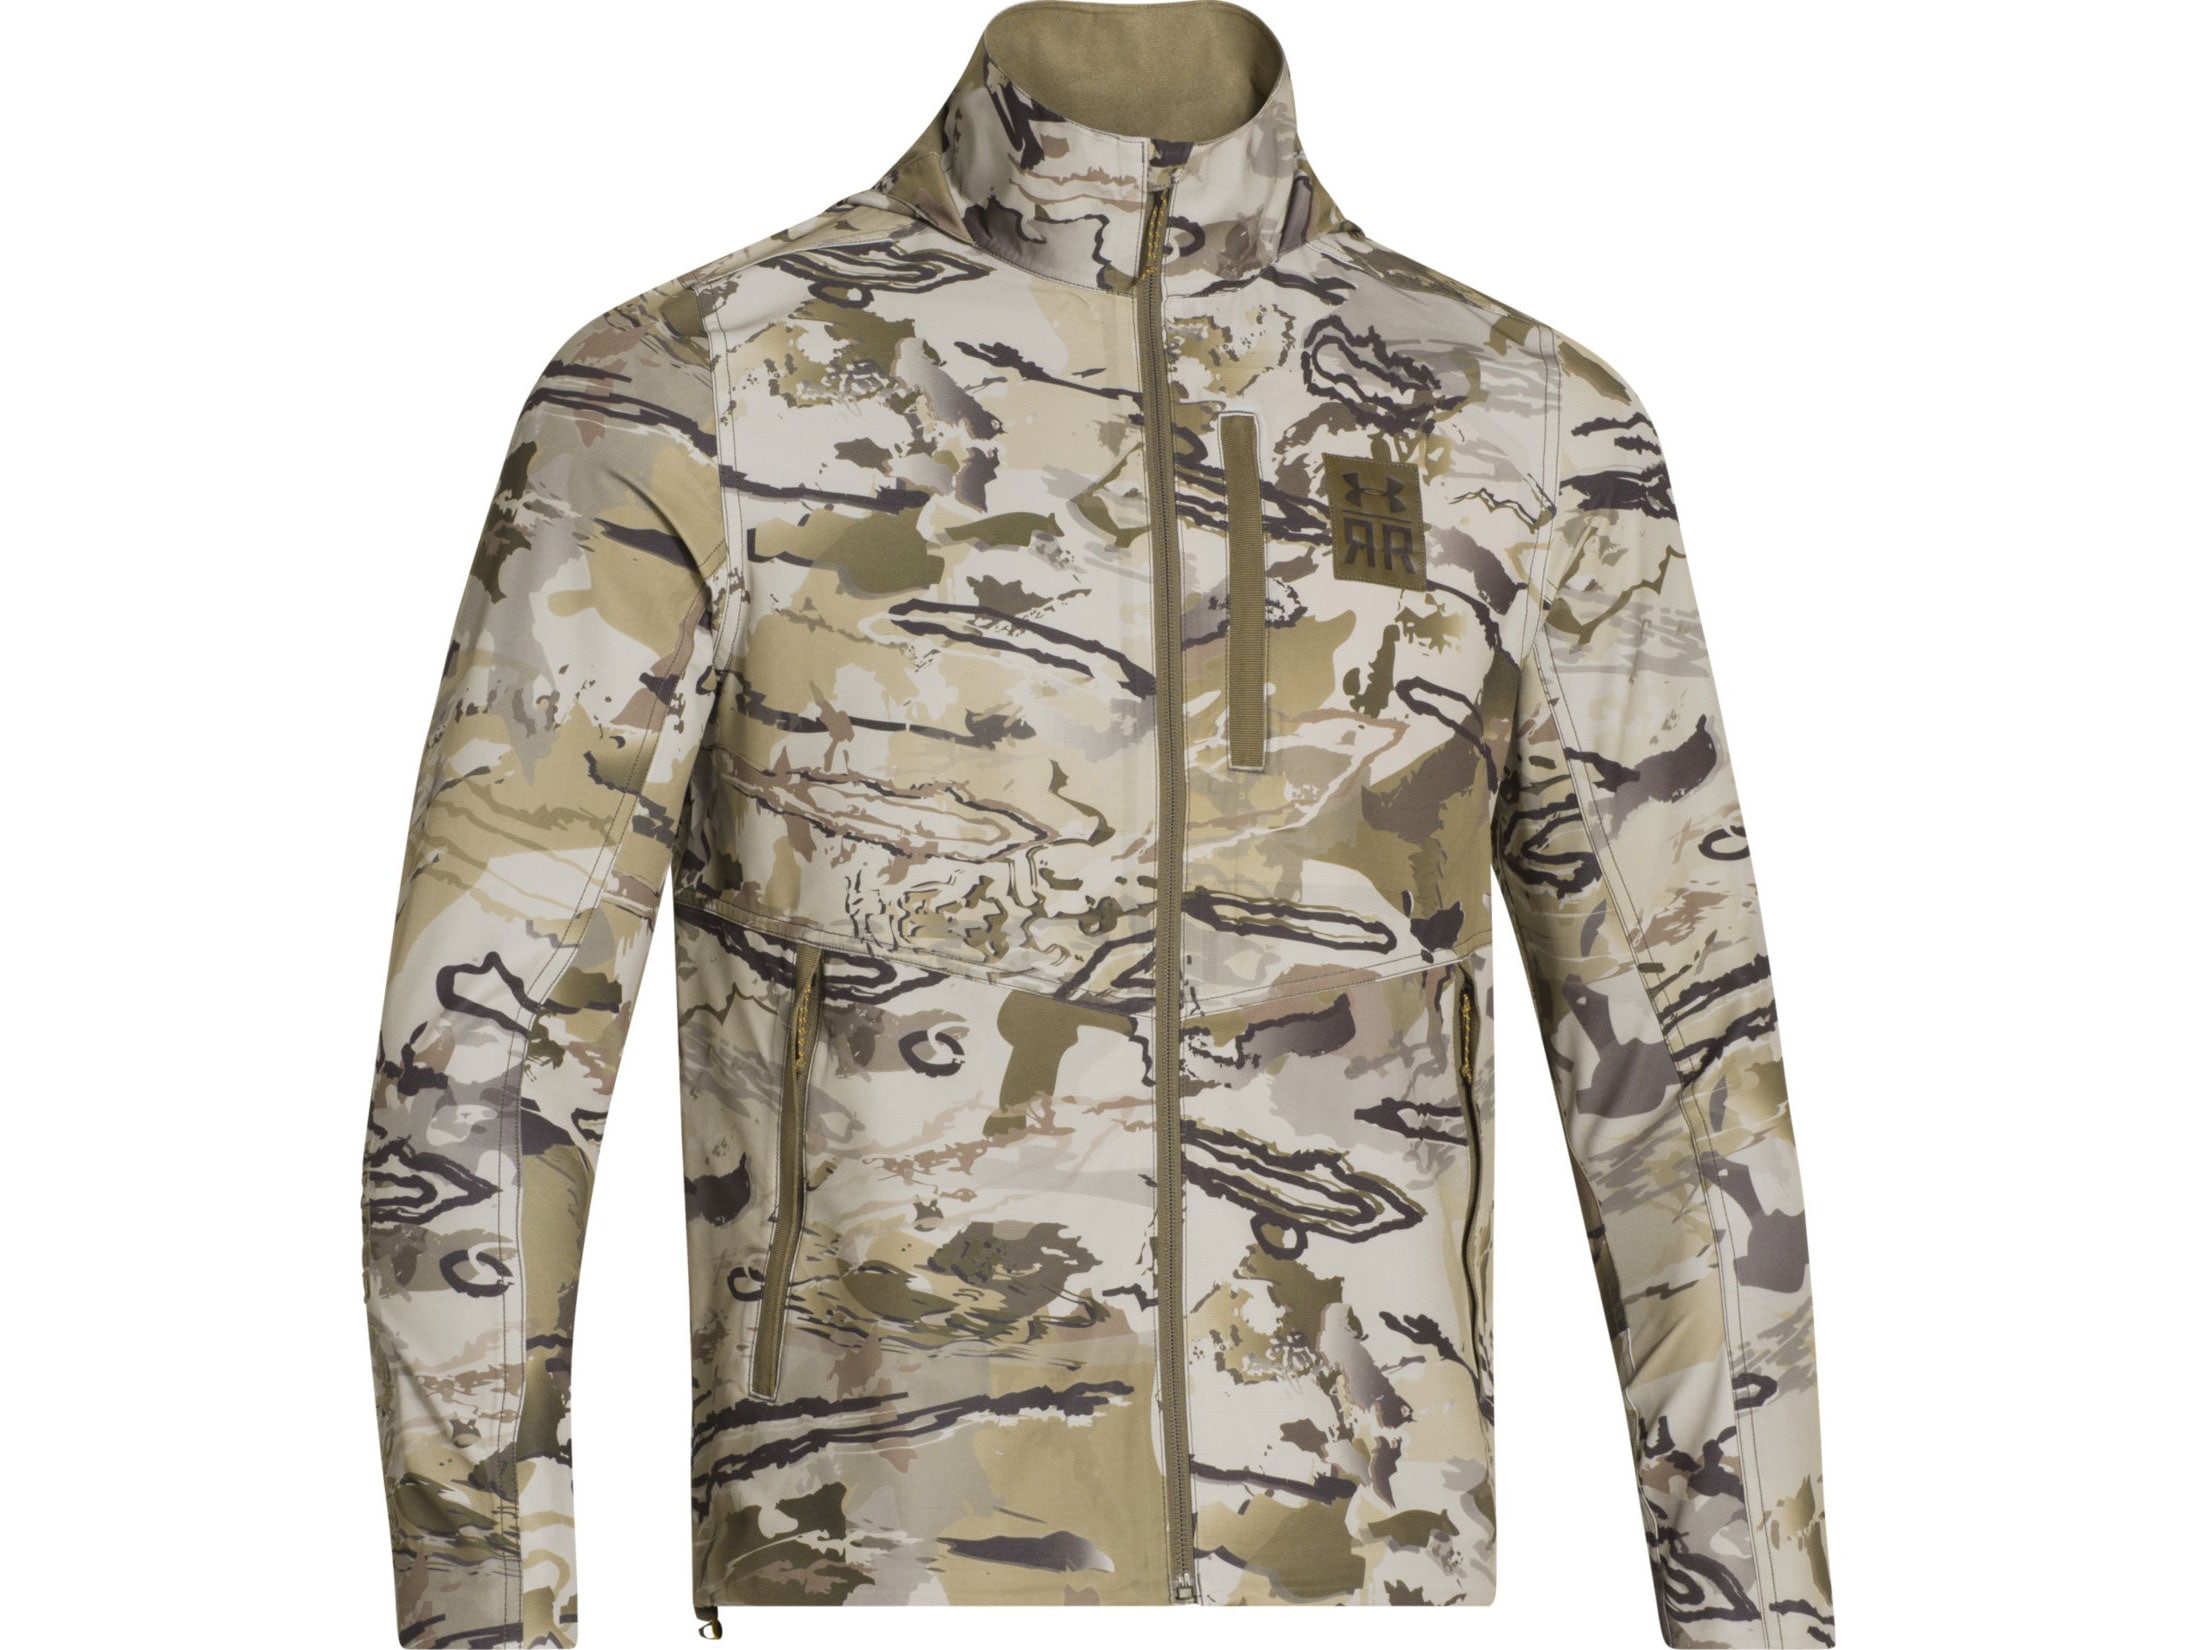 discontinued under armour hunting gear